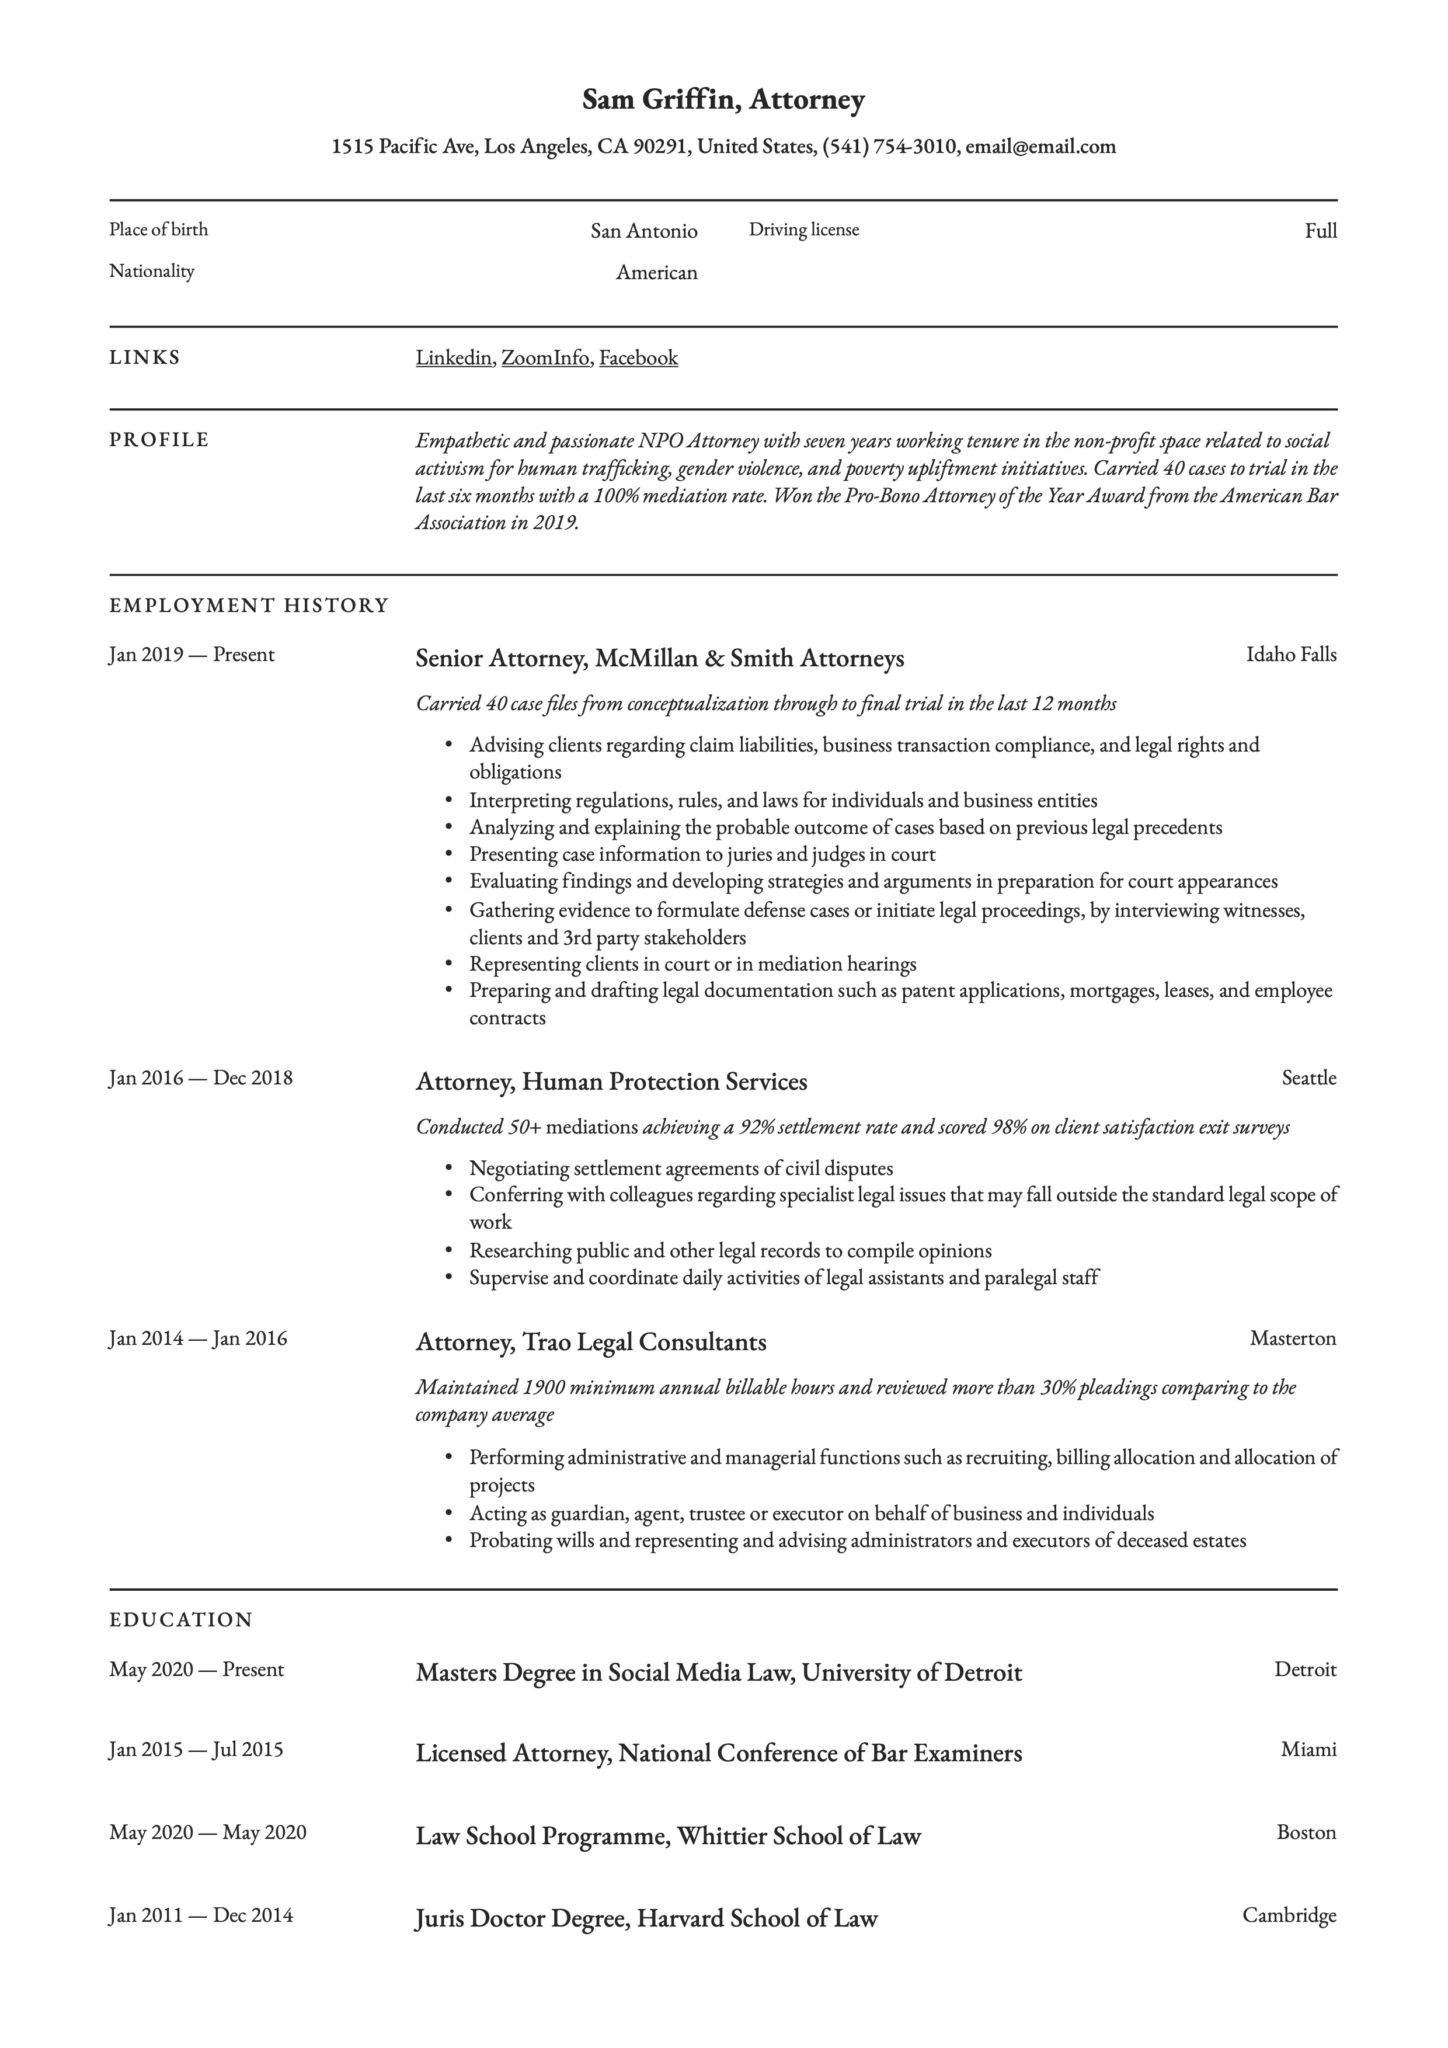 Sample Resumes for Real Estate attorneys 18 attorney Resume Examples & Writing Guide Templates 2022